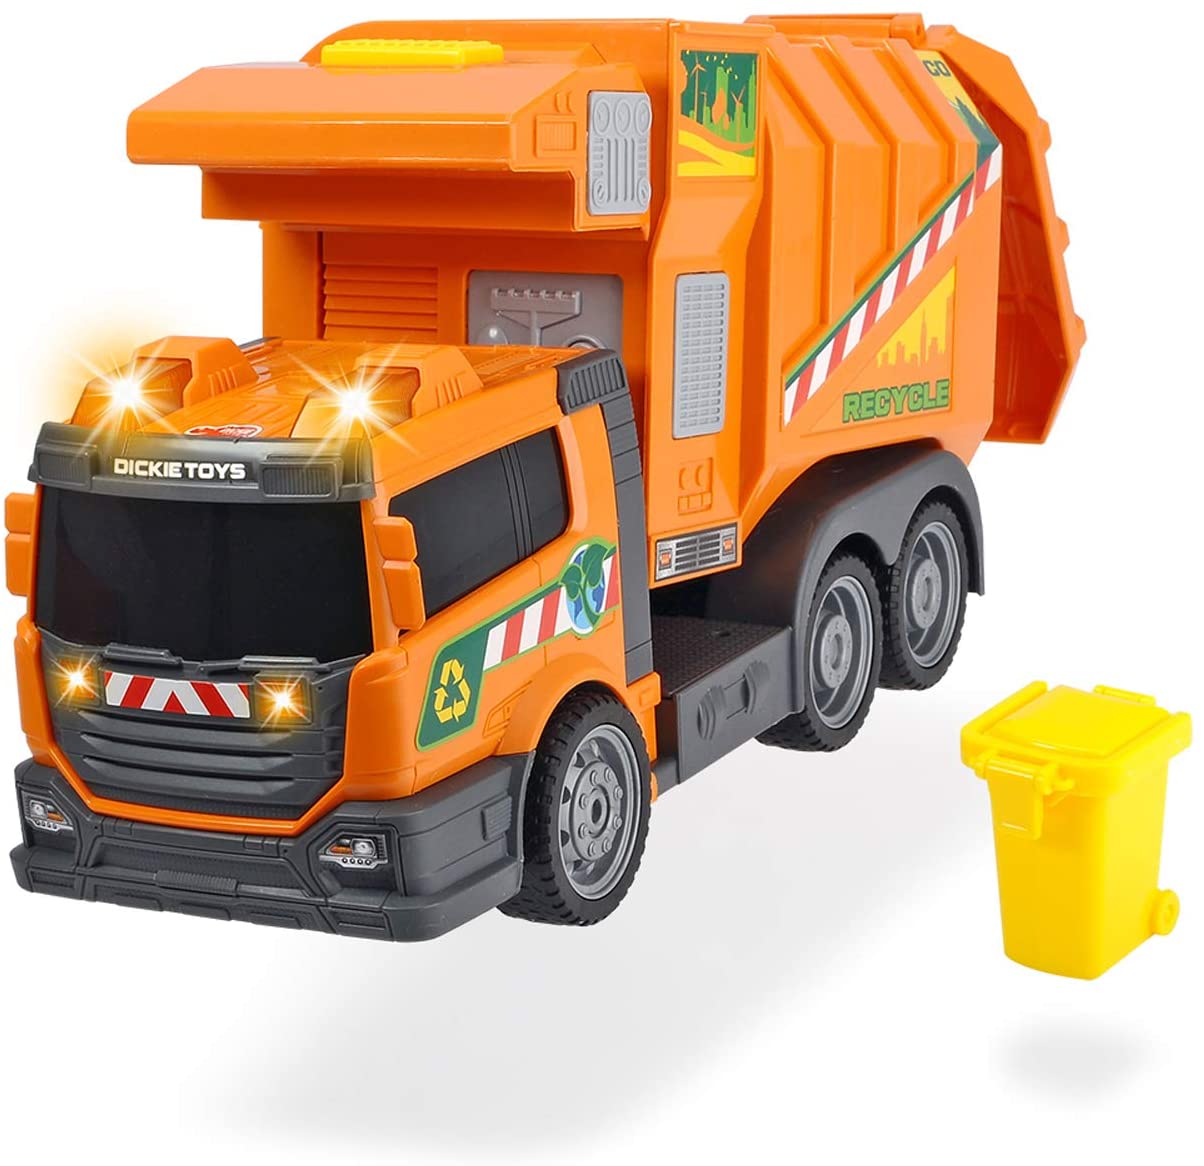 Dickie Toys 203308383 Garbage Collector 203308383 Garbage Battery-Operated 